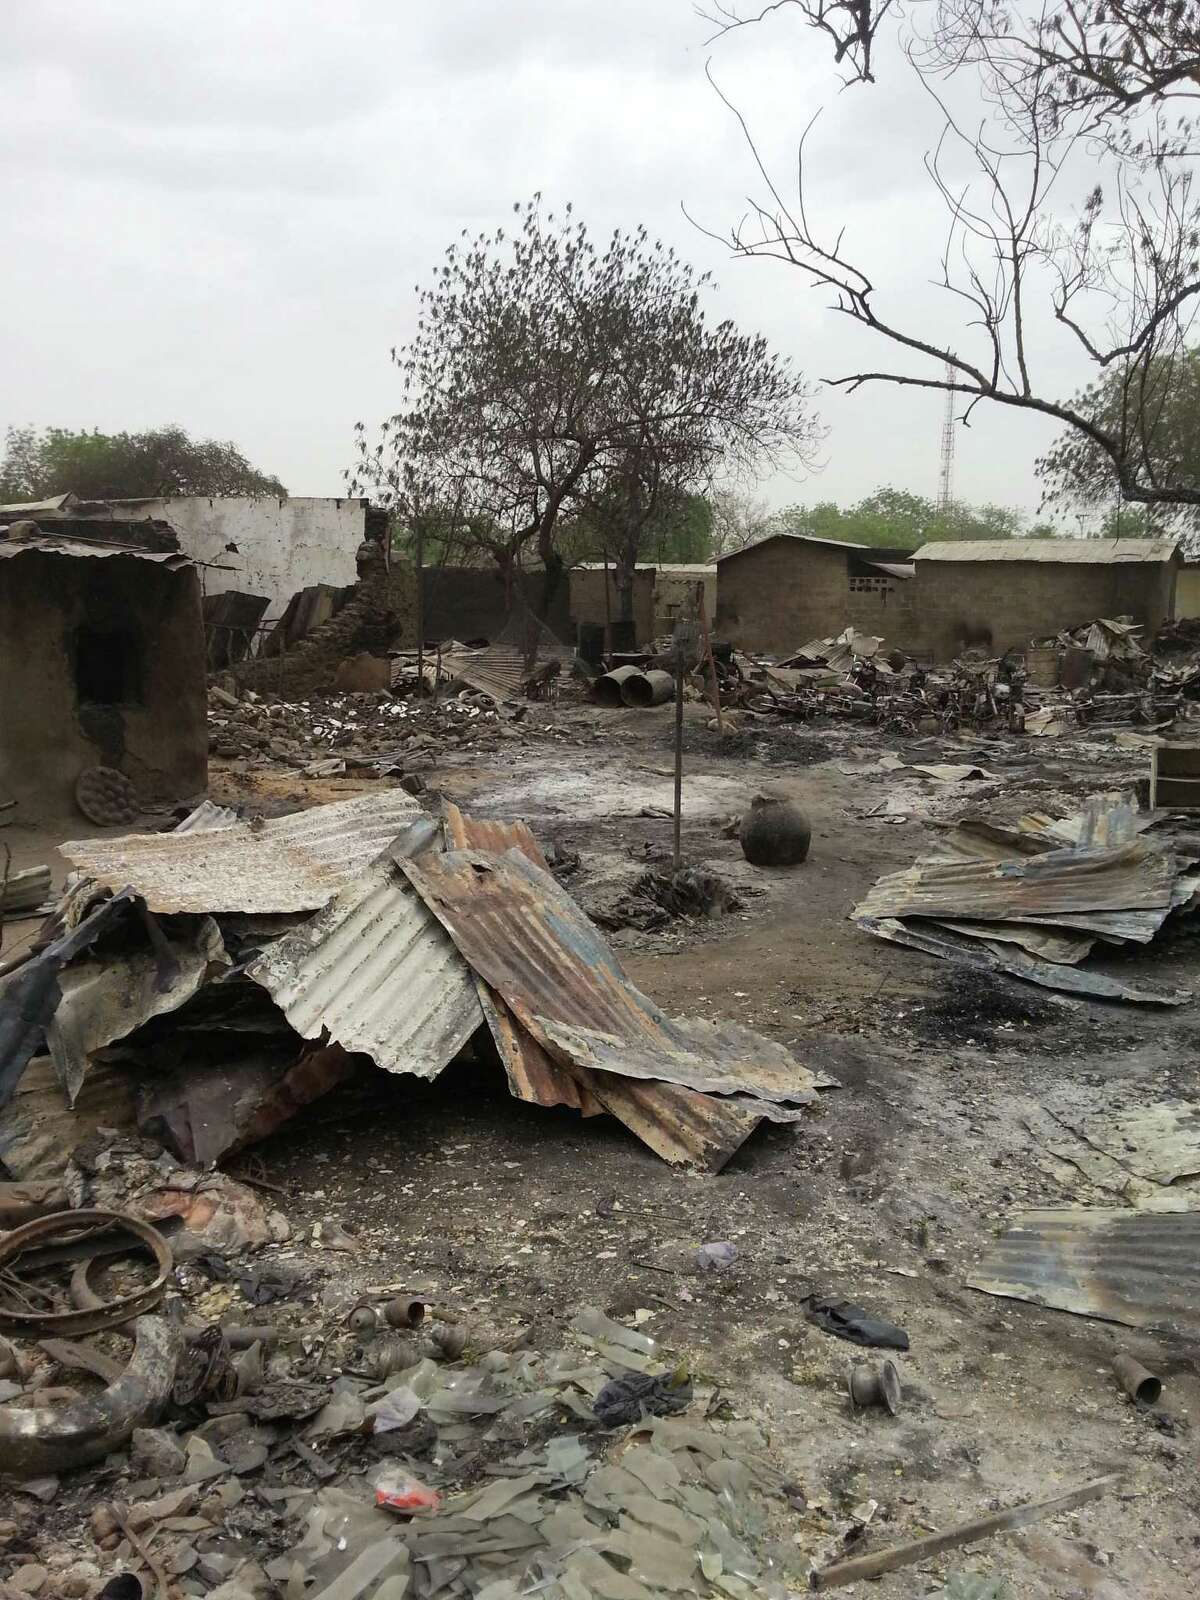 The village of Baga was heavily damaged in an April 2013 attack, as seen above. Reports of new attacks include heavy loss of life.